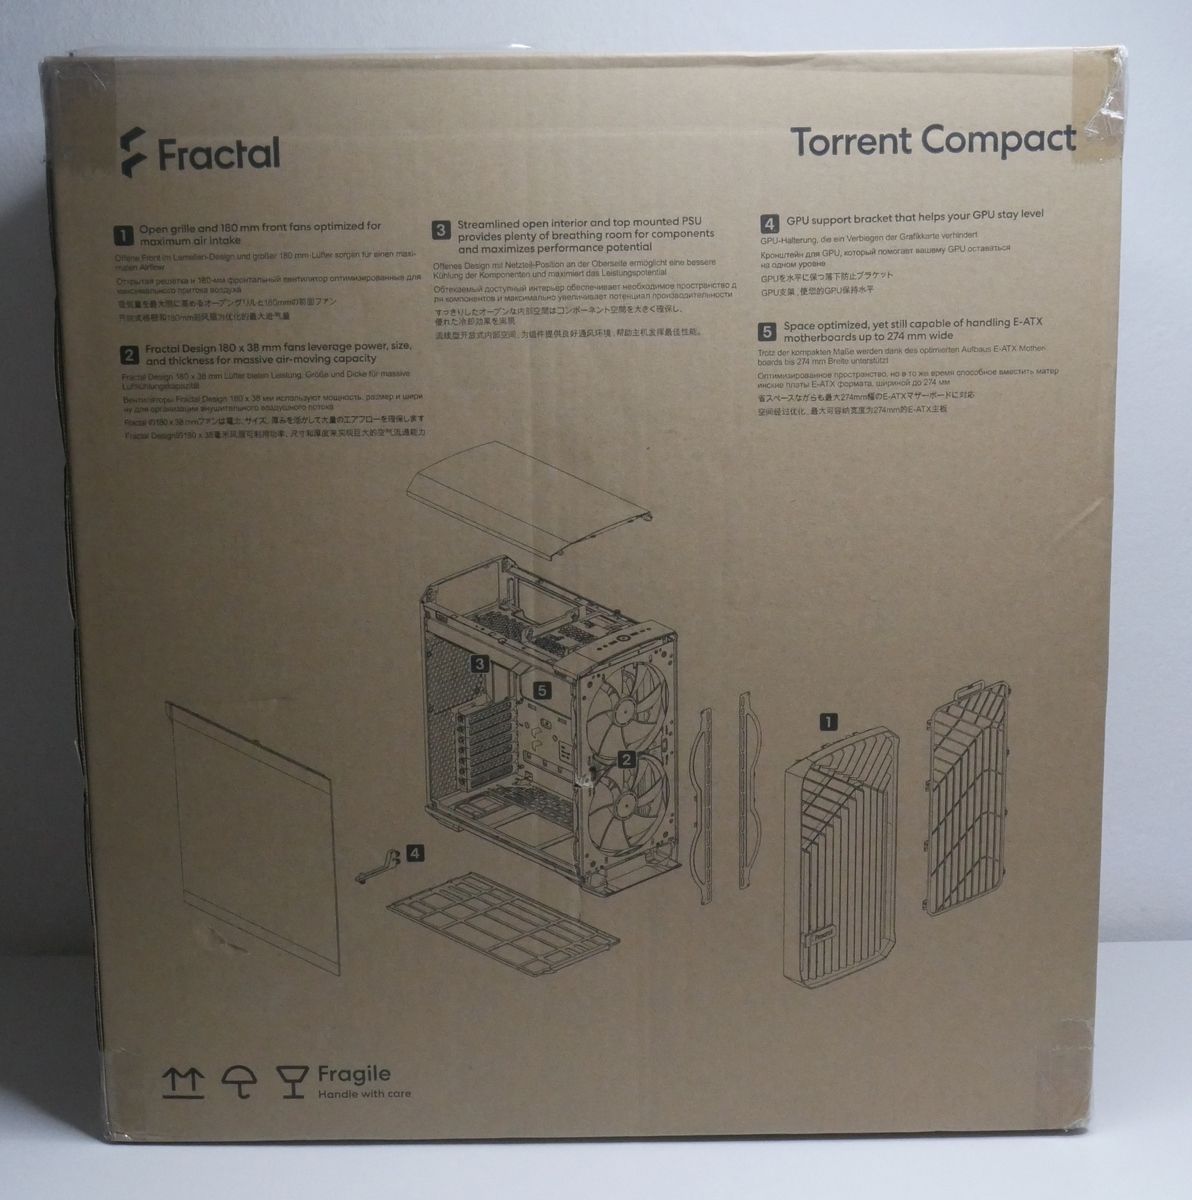 Review Fractal Torrent Compact 4